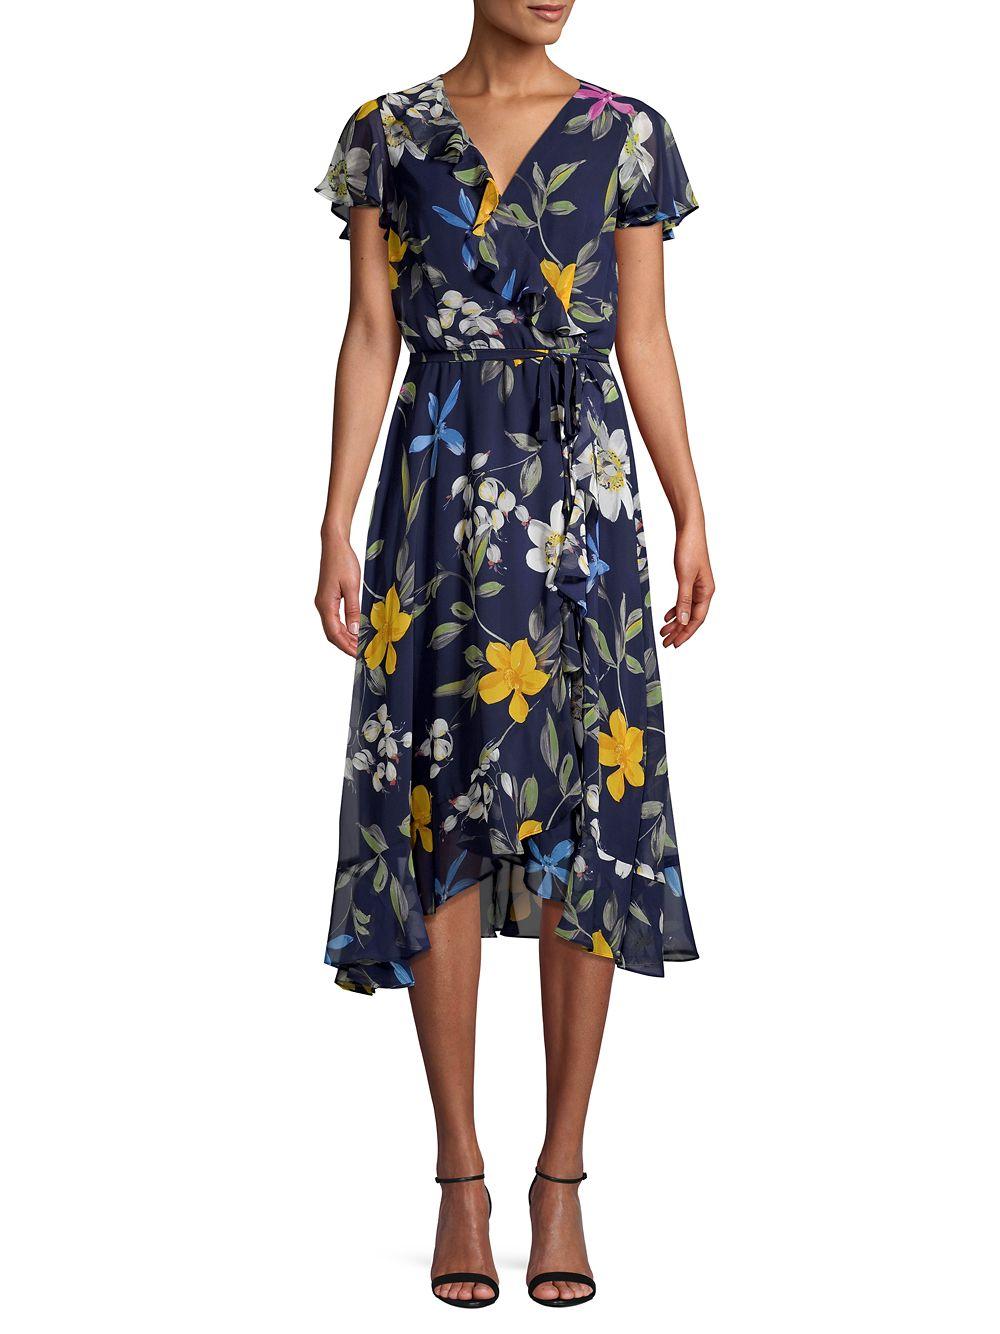 Adrianna Papell Ruffle-trimmed Floral Dress in Blue - Lyst